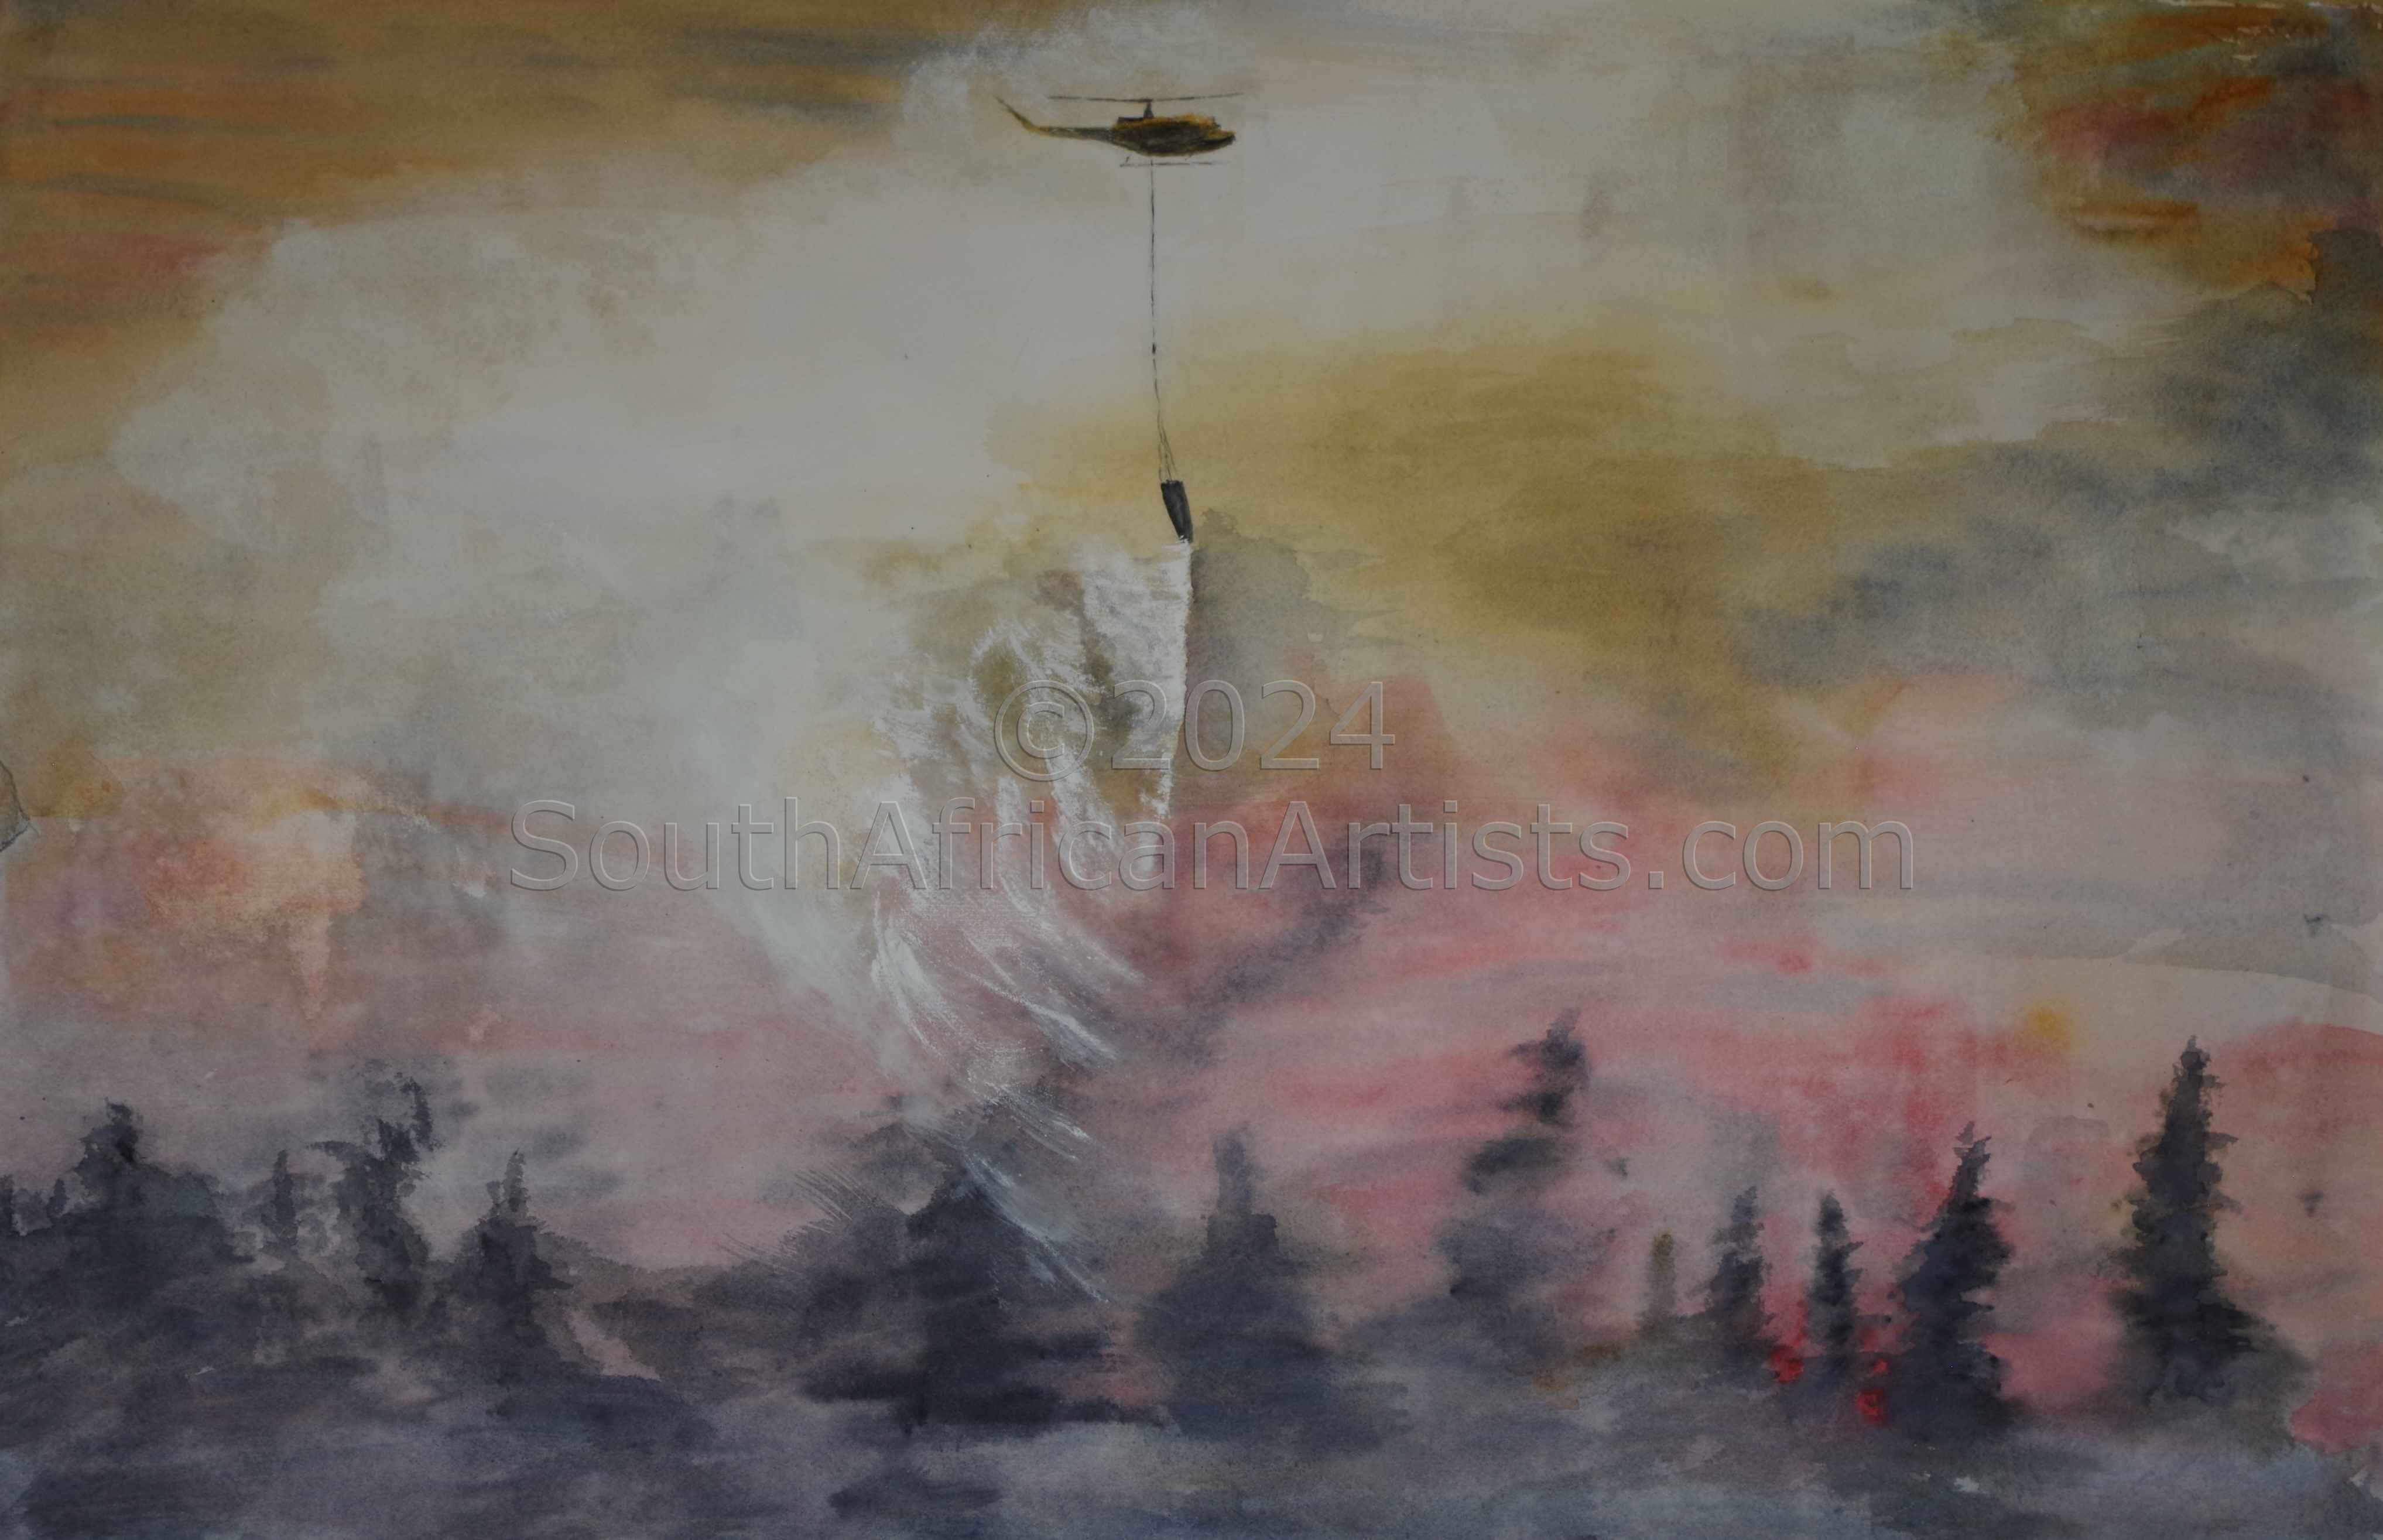 Working on Fire - Helicopter Dropping Water on F